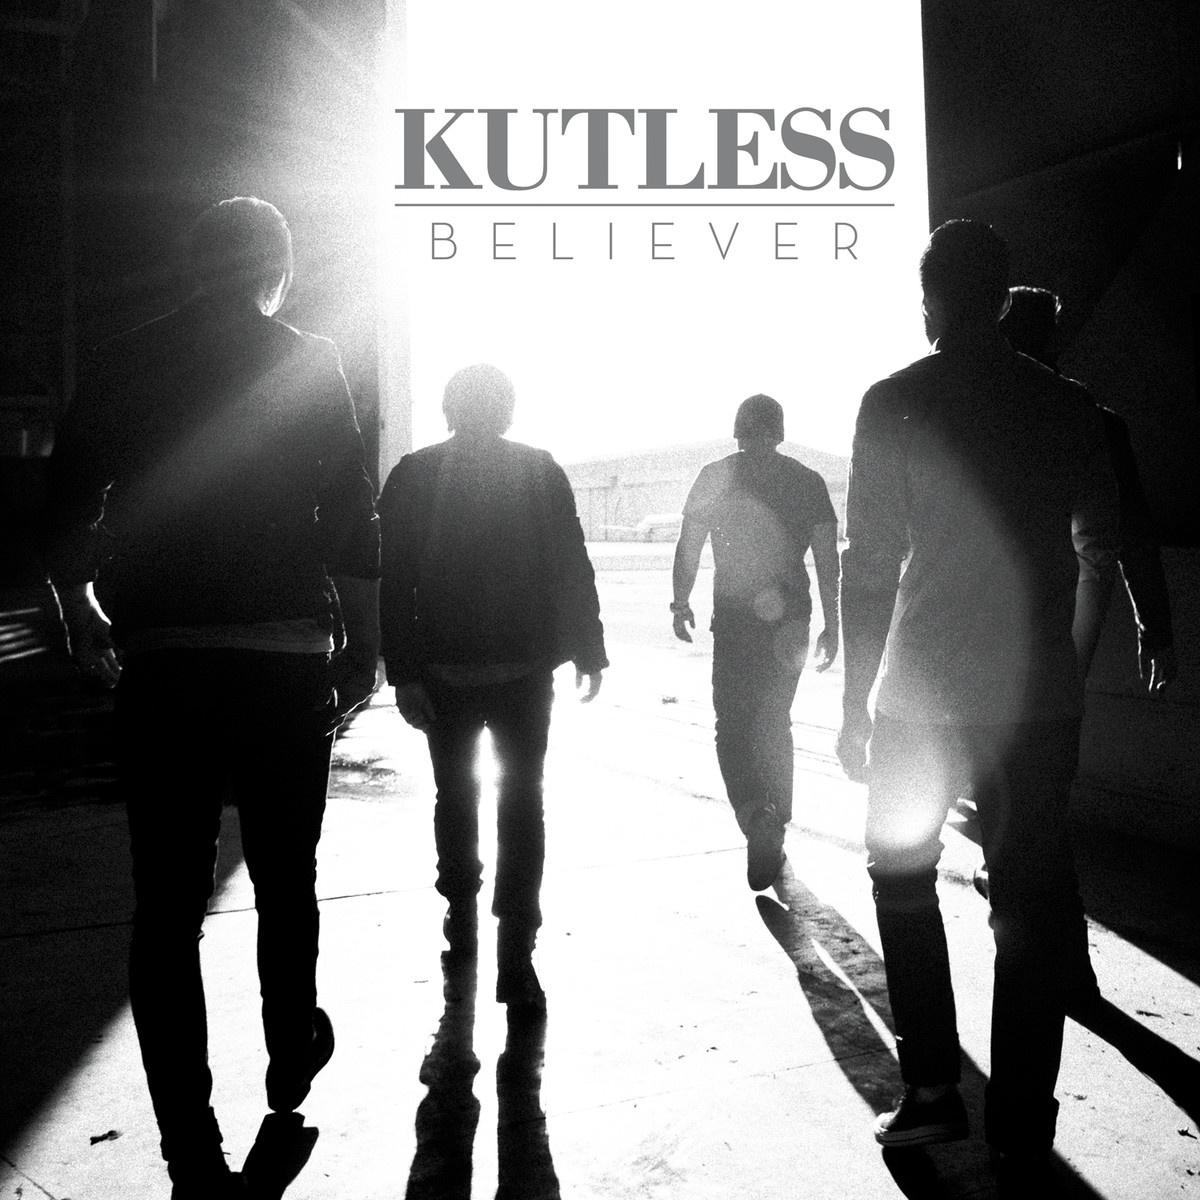 Kutless - This Is Love